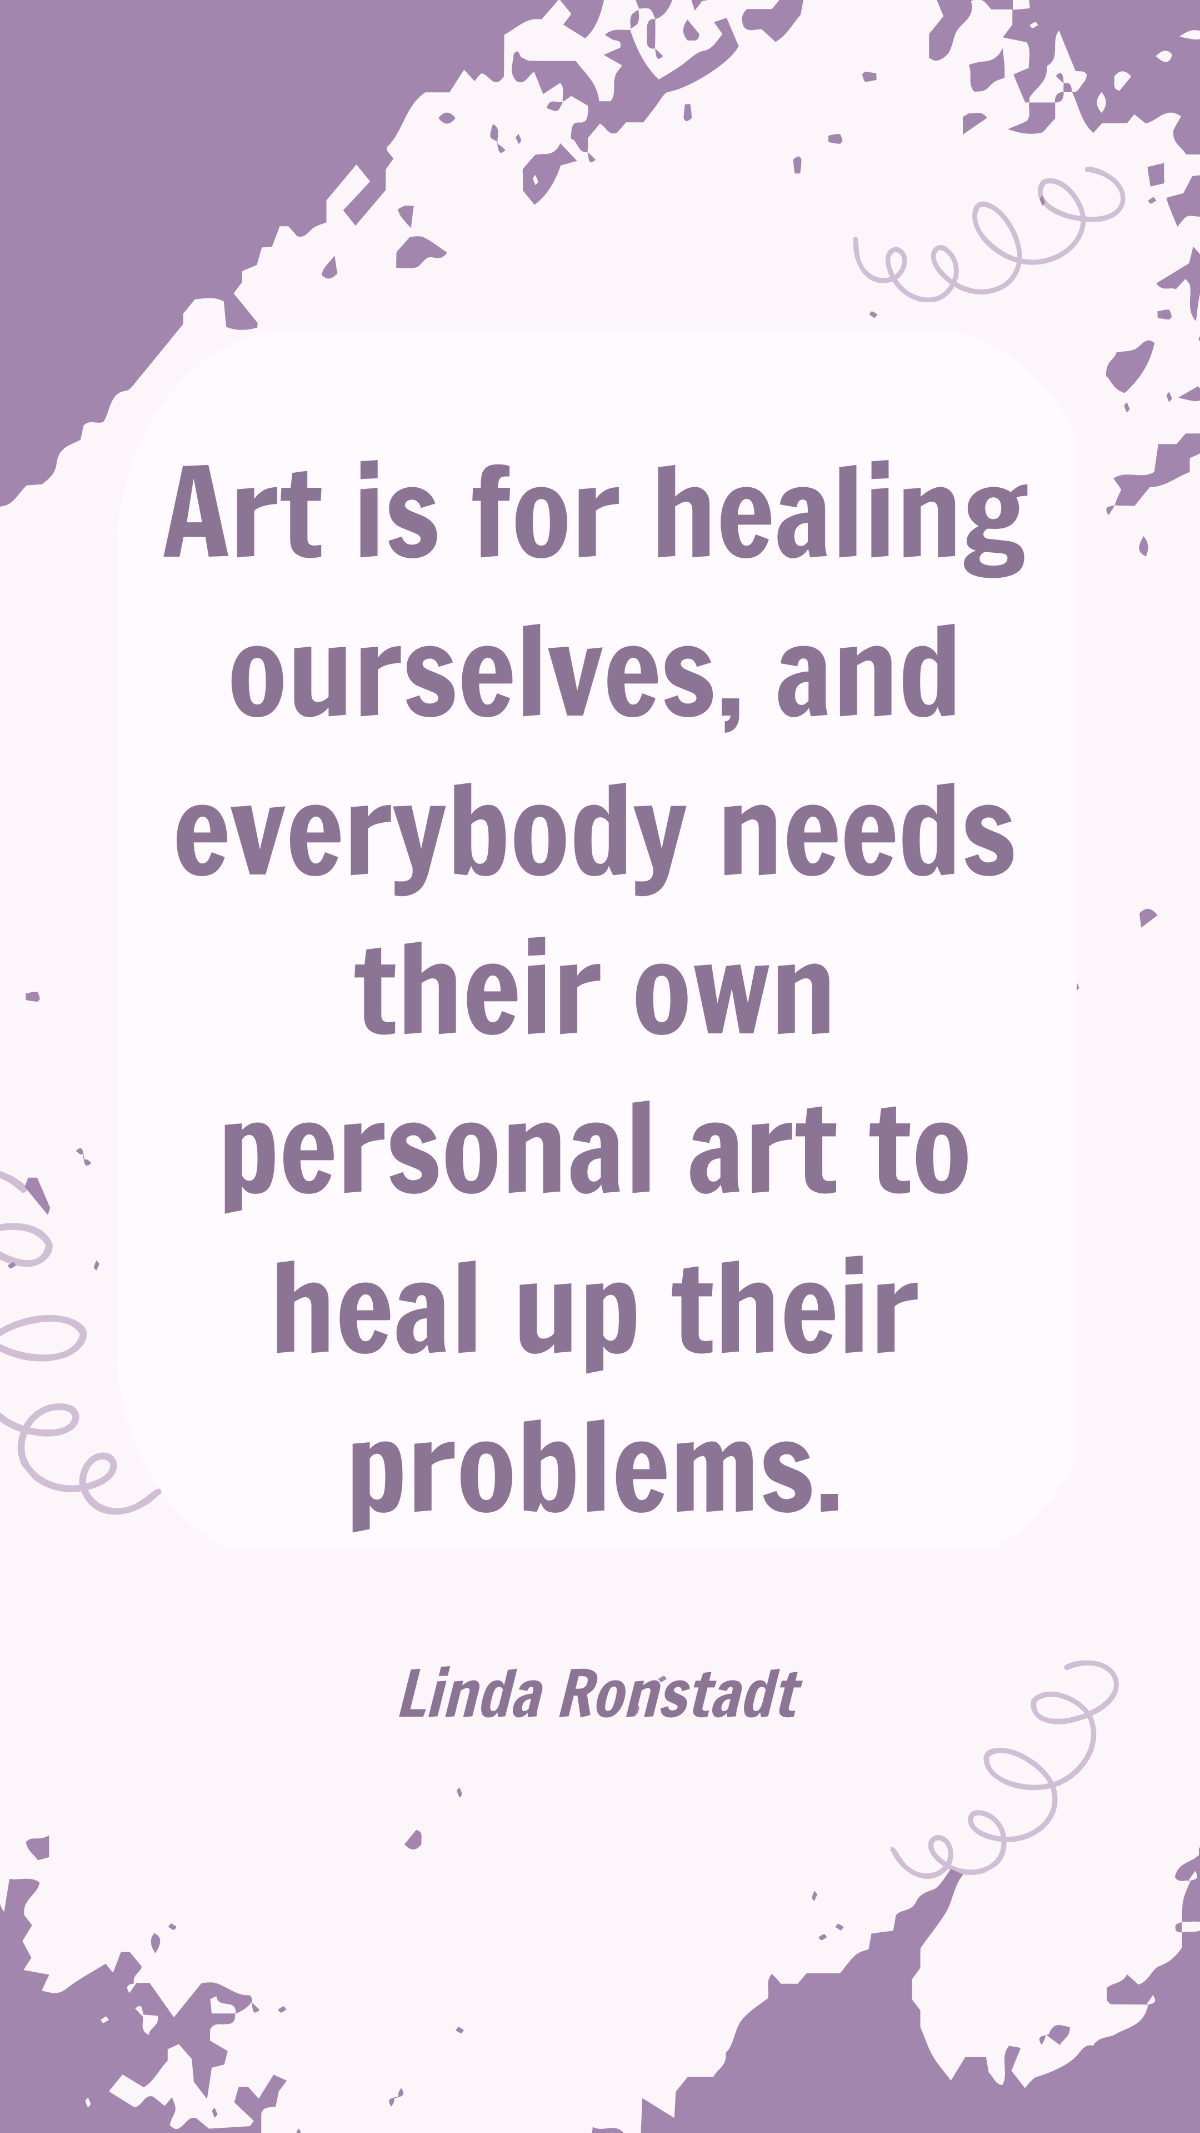 Linda Ronstadt - Art is for healing ourselves, and everybody needs their own personal art to heal up their problems.